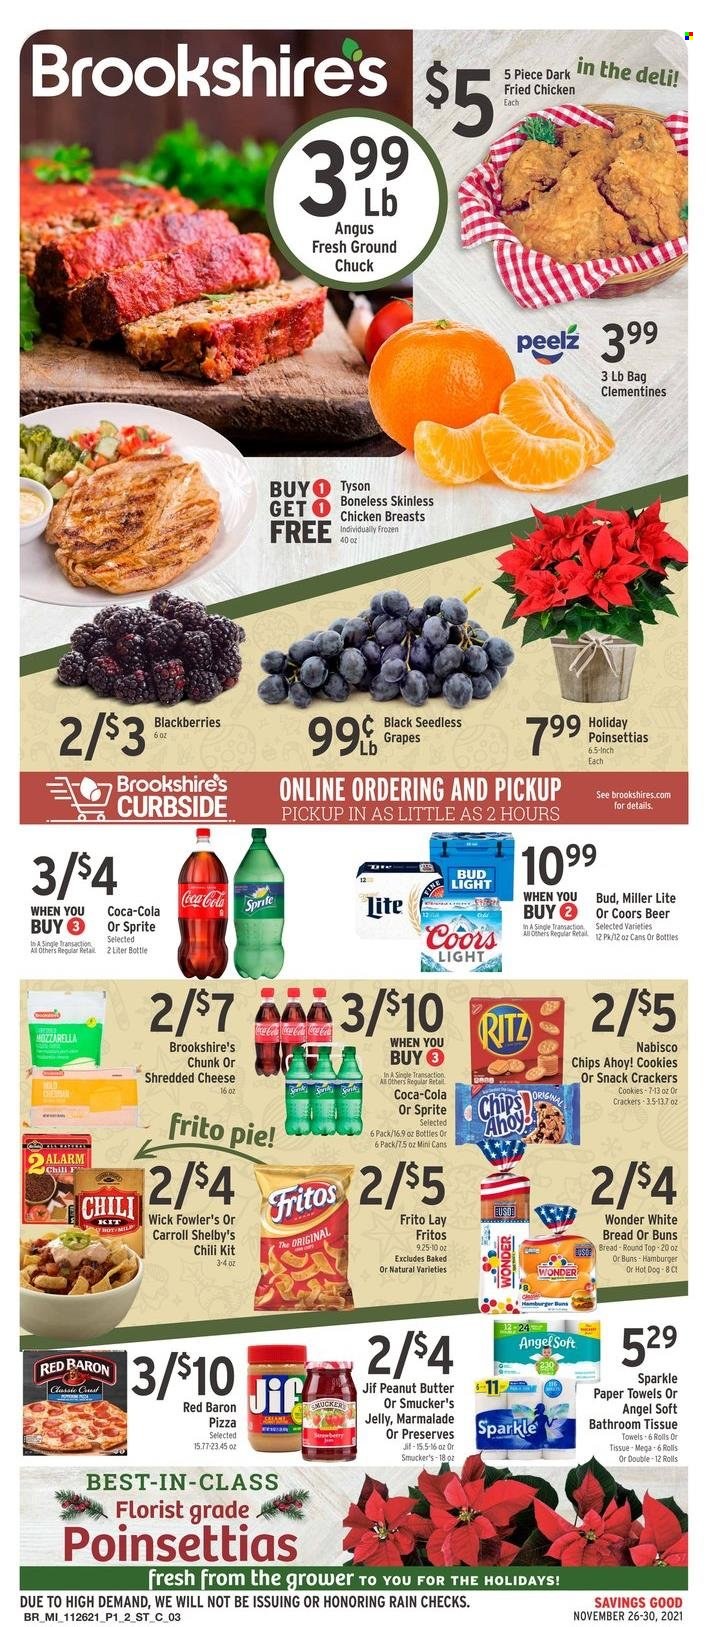 thumbnail - Brookshires Flyer - 11/26/2021 - 11/30/2021 - Sales products - seedless grapes, bread, white bread, pie, buns, blackberries, grapes, hot dog, pizza, hamburger, fried chicken, shredded cheese, Red Baron, cookies, jelly, crackers, Chips Ahoy!, RITZ, Fritos, peanut butter, Jif, Coca-Cola, Sprite, beer, Bud Light, chicken breasts, ground chuck, bath tissue, kitchen towels, paper towels, clementines, Miller Lite, Coors. Page 1.